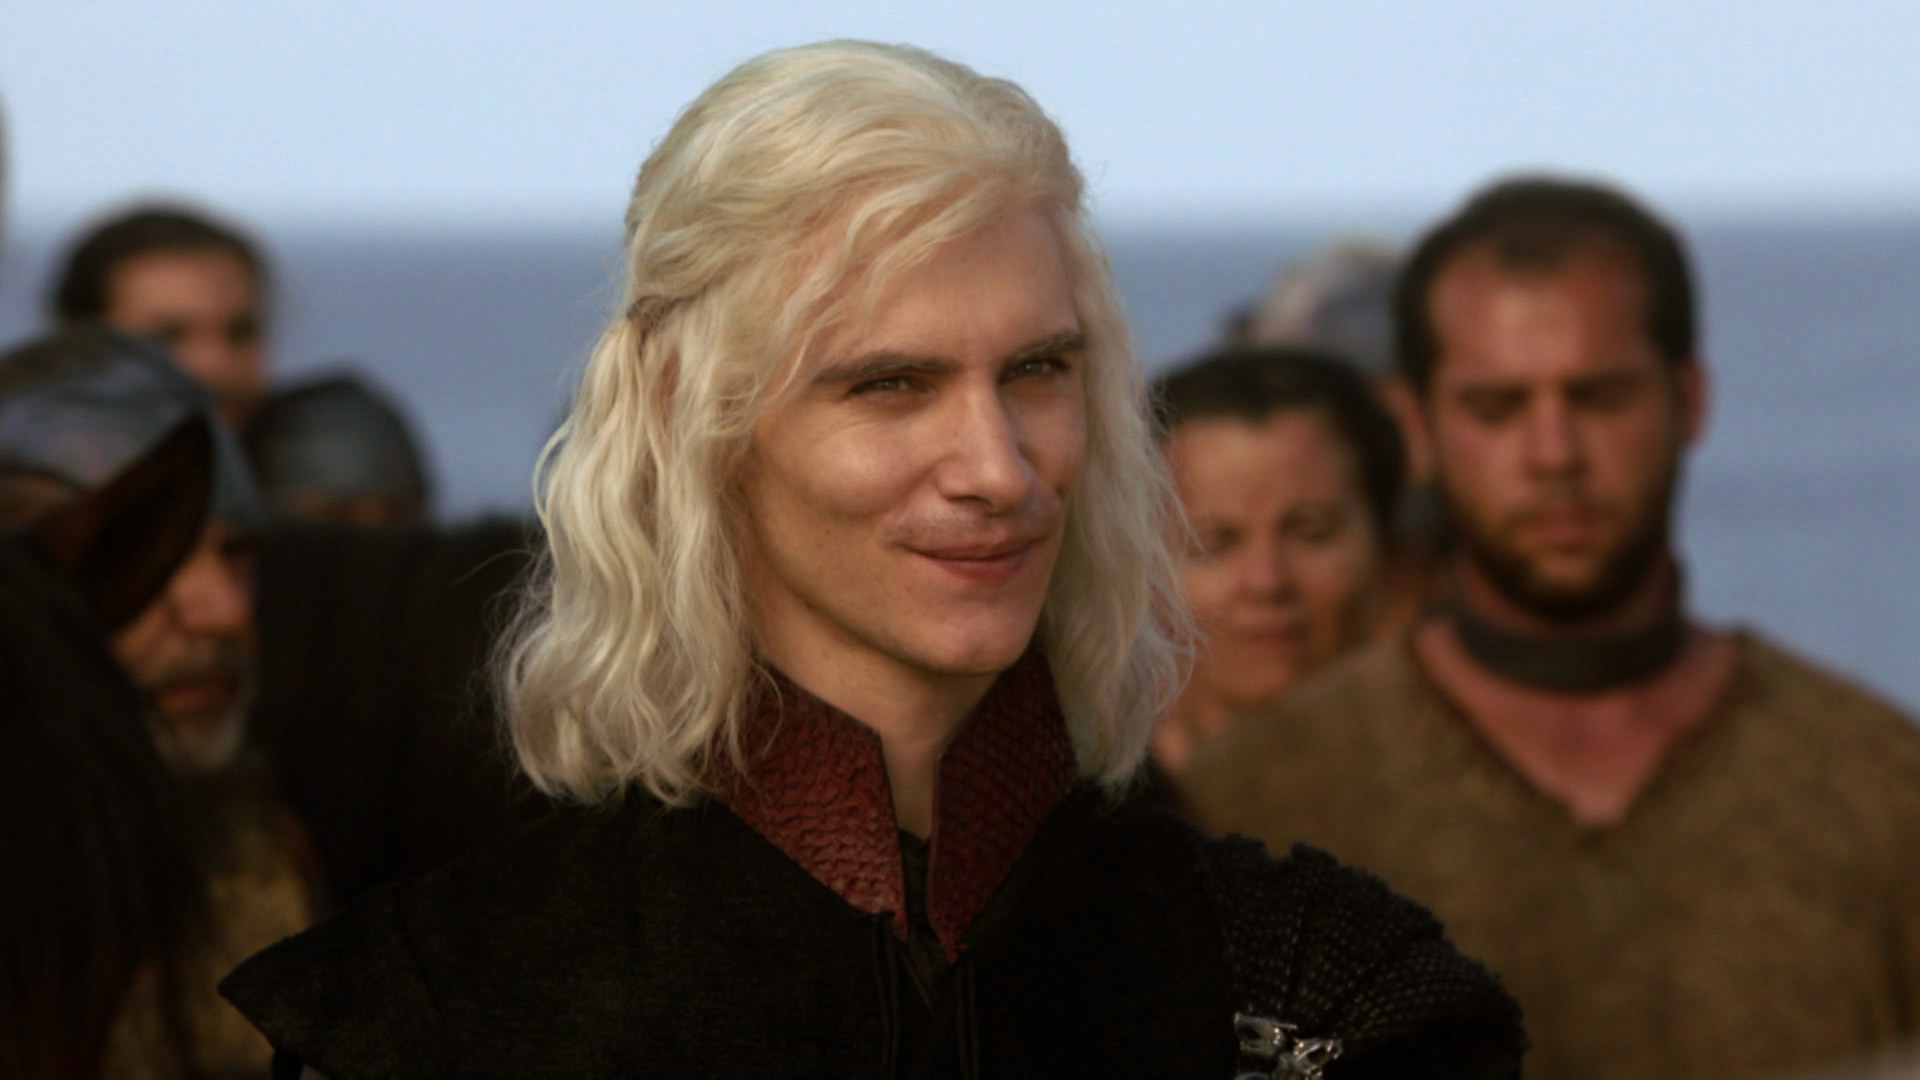 ⚔️ Only “Game of Thrones” Fanatics Can Get a Perfect Score on This Character Death Quiz Viserys Targaryen